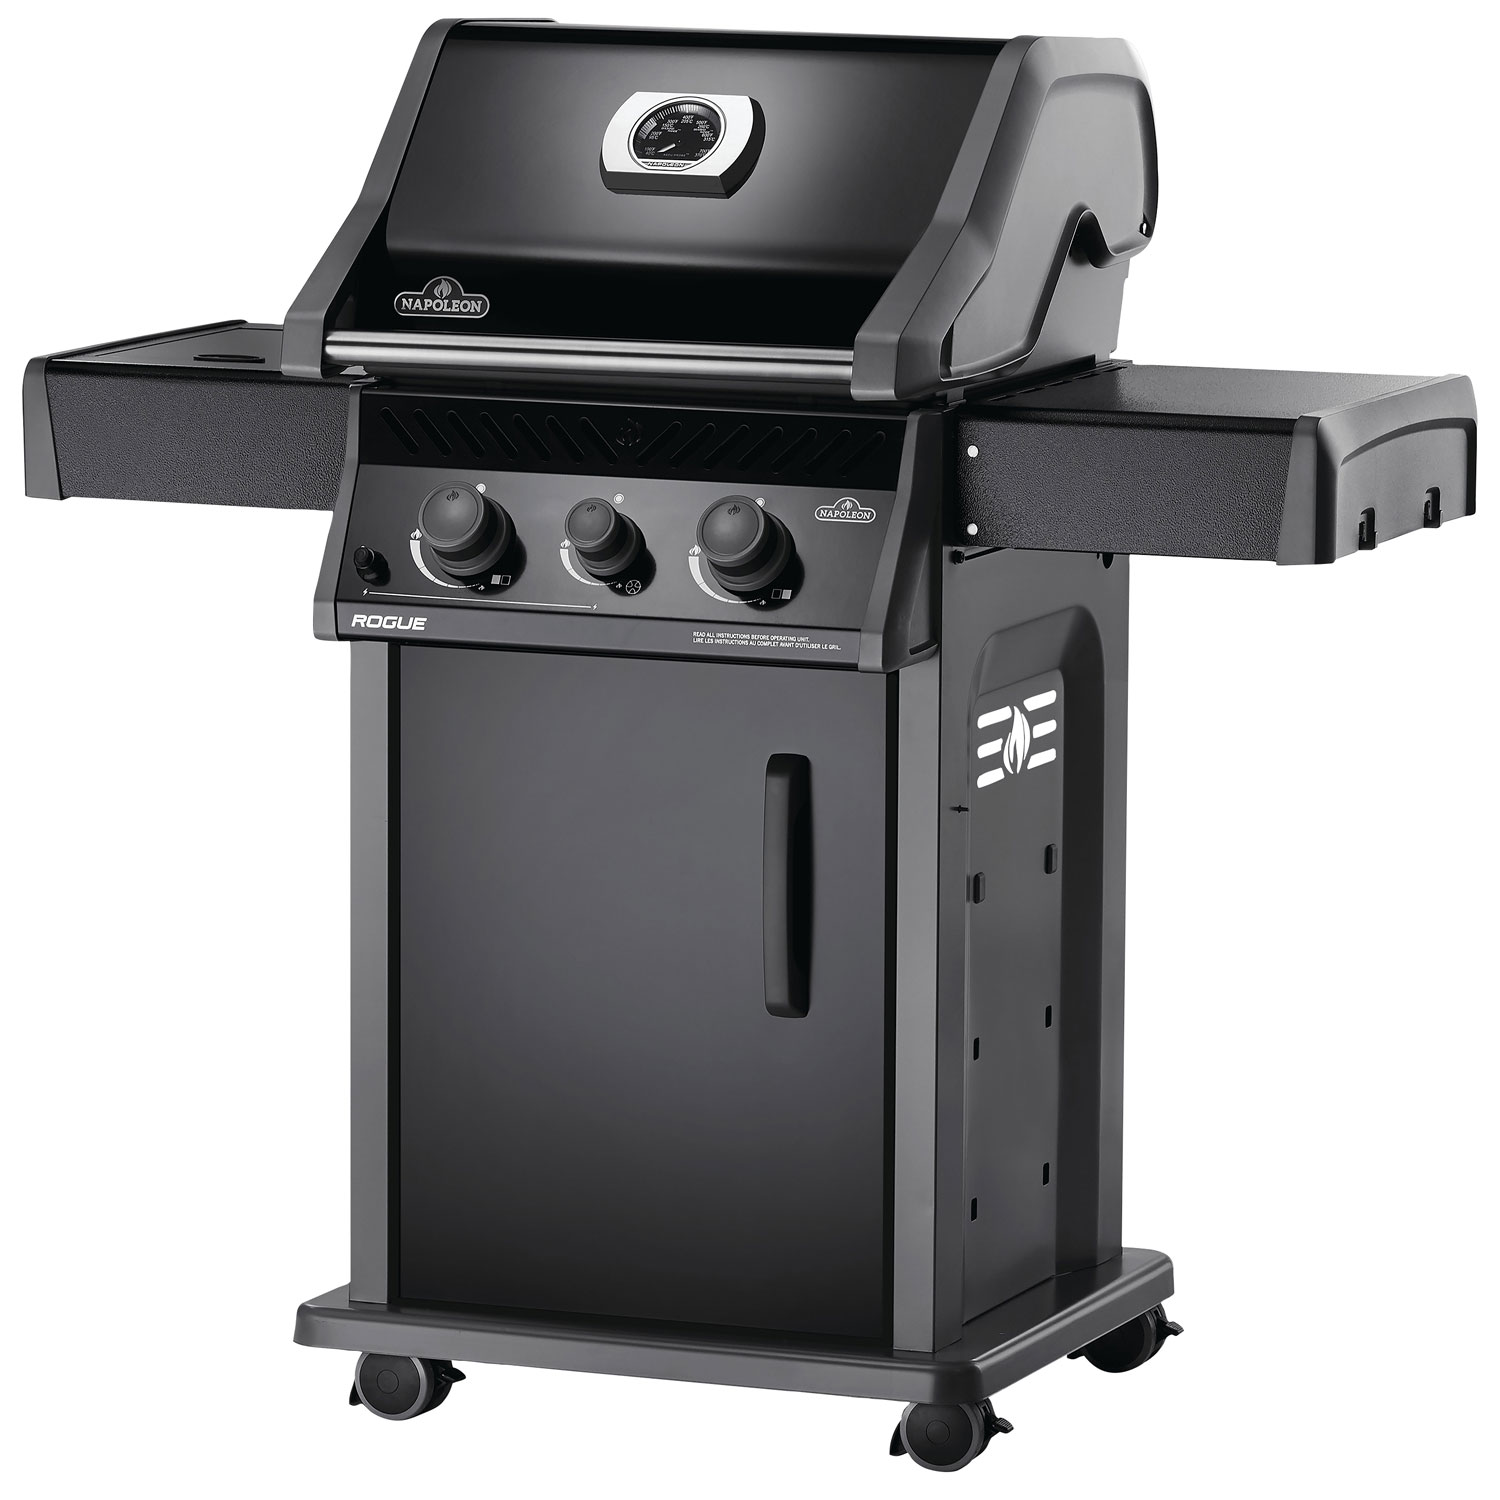 Napoleon Rogue 365 32000 BTU Propane BBQ with Grill Cover - Black - Only at Best Buy